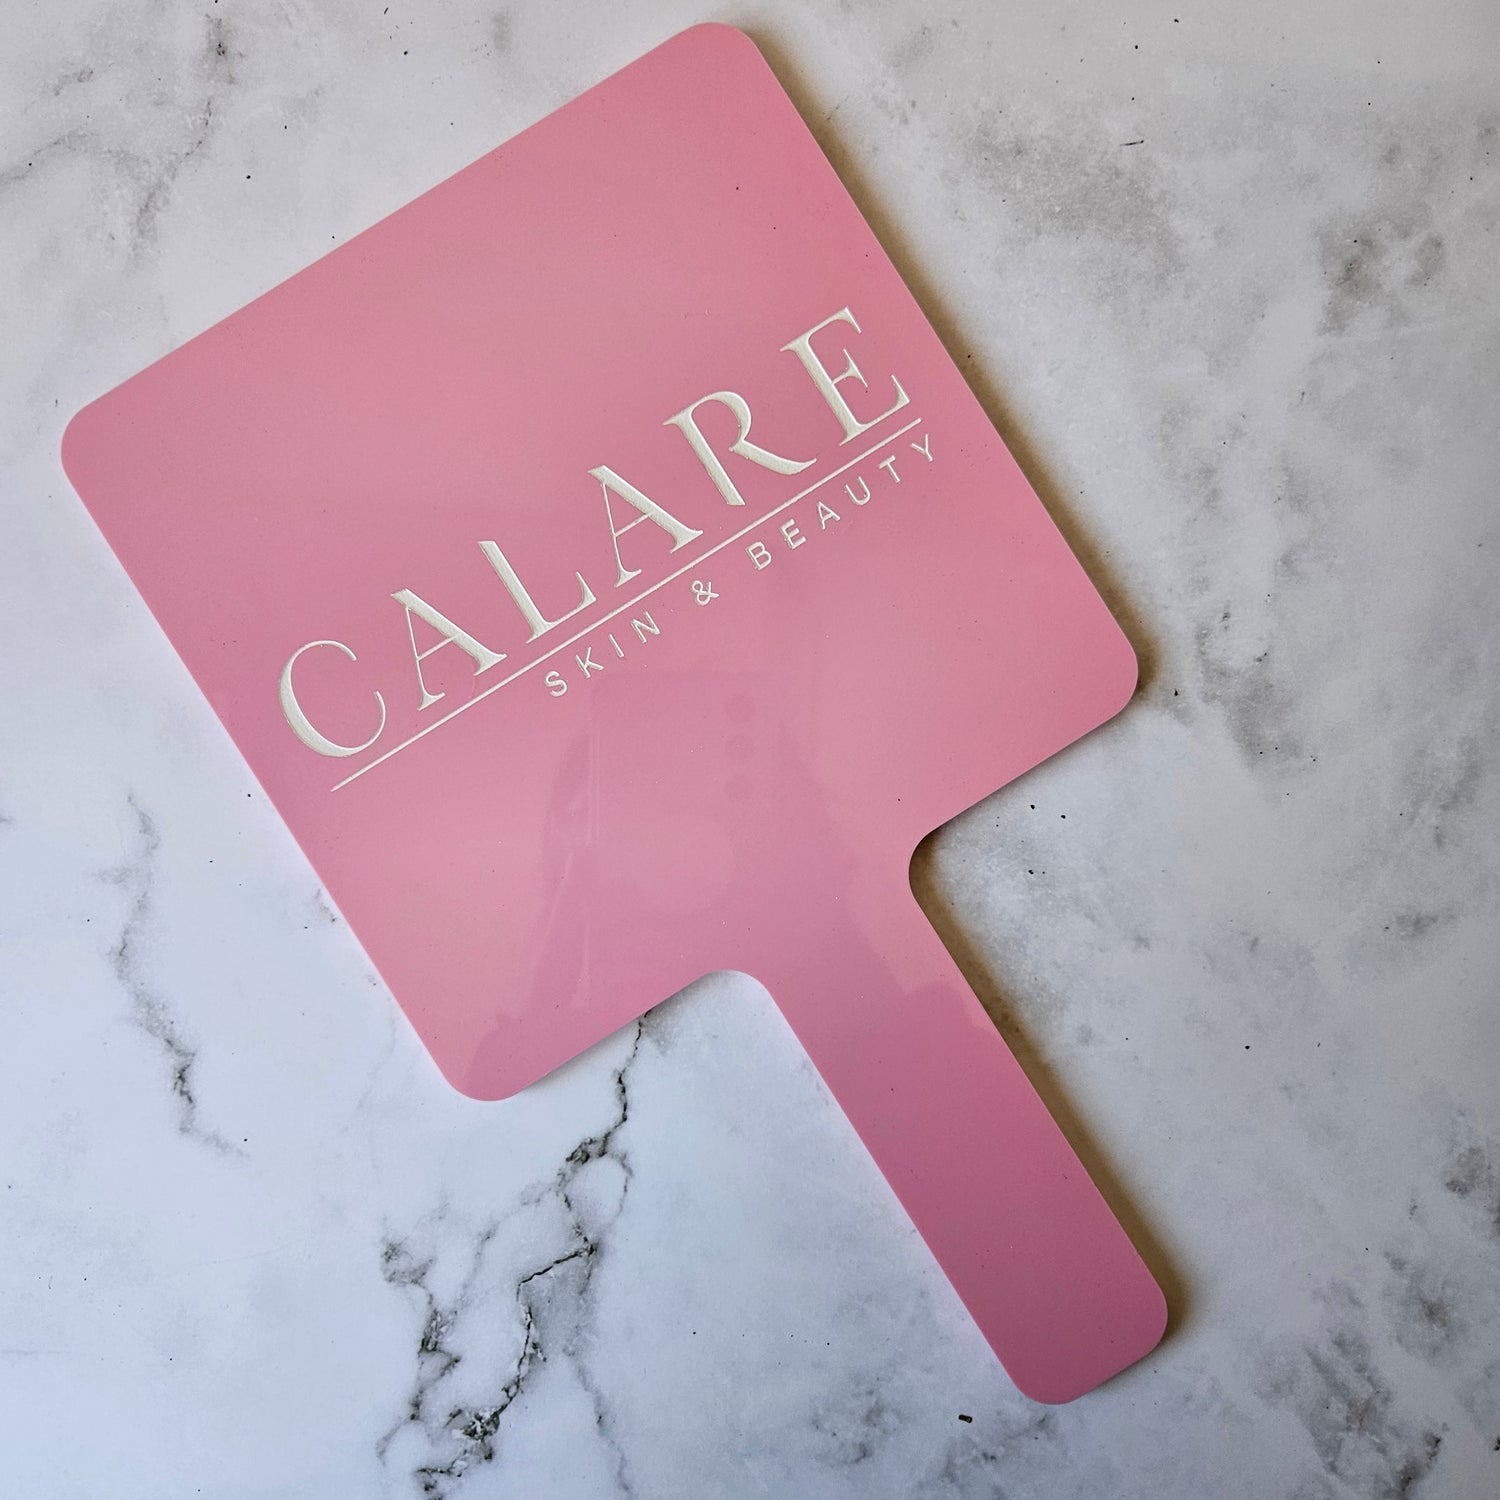 Square handheld mirror in pink gloss acrylic with white logo engraving for skin and beauty salon australia